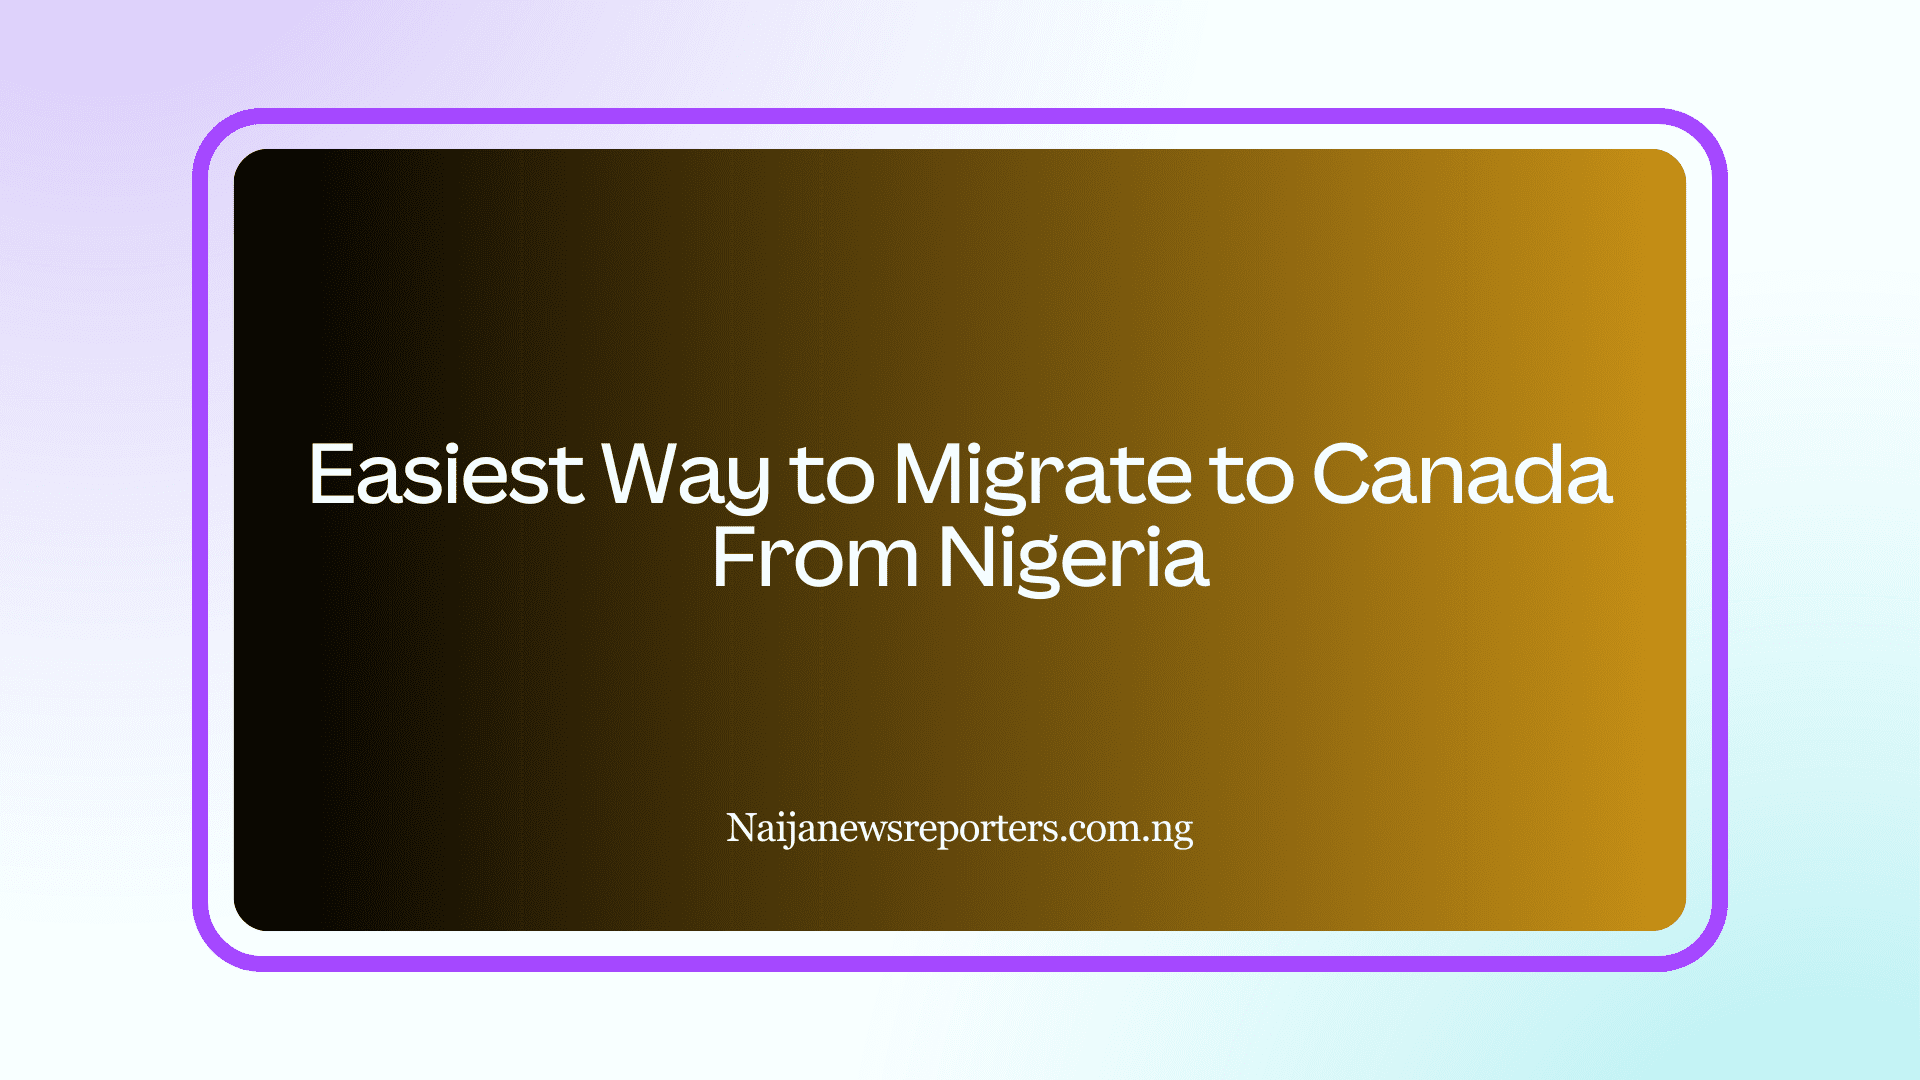 Easiest Way to Migrate to Canada From Nigeria